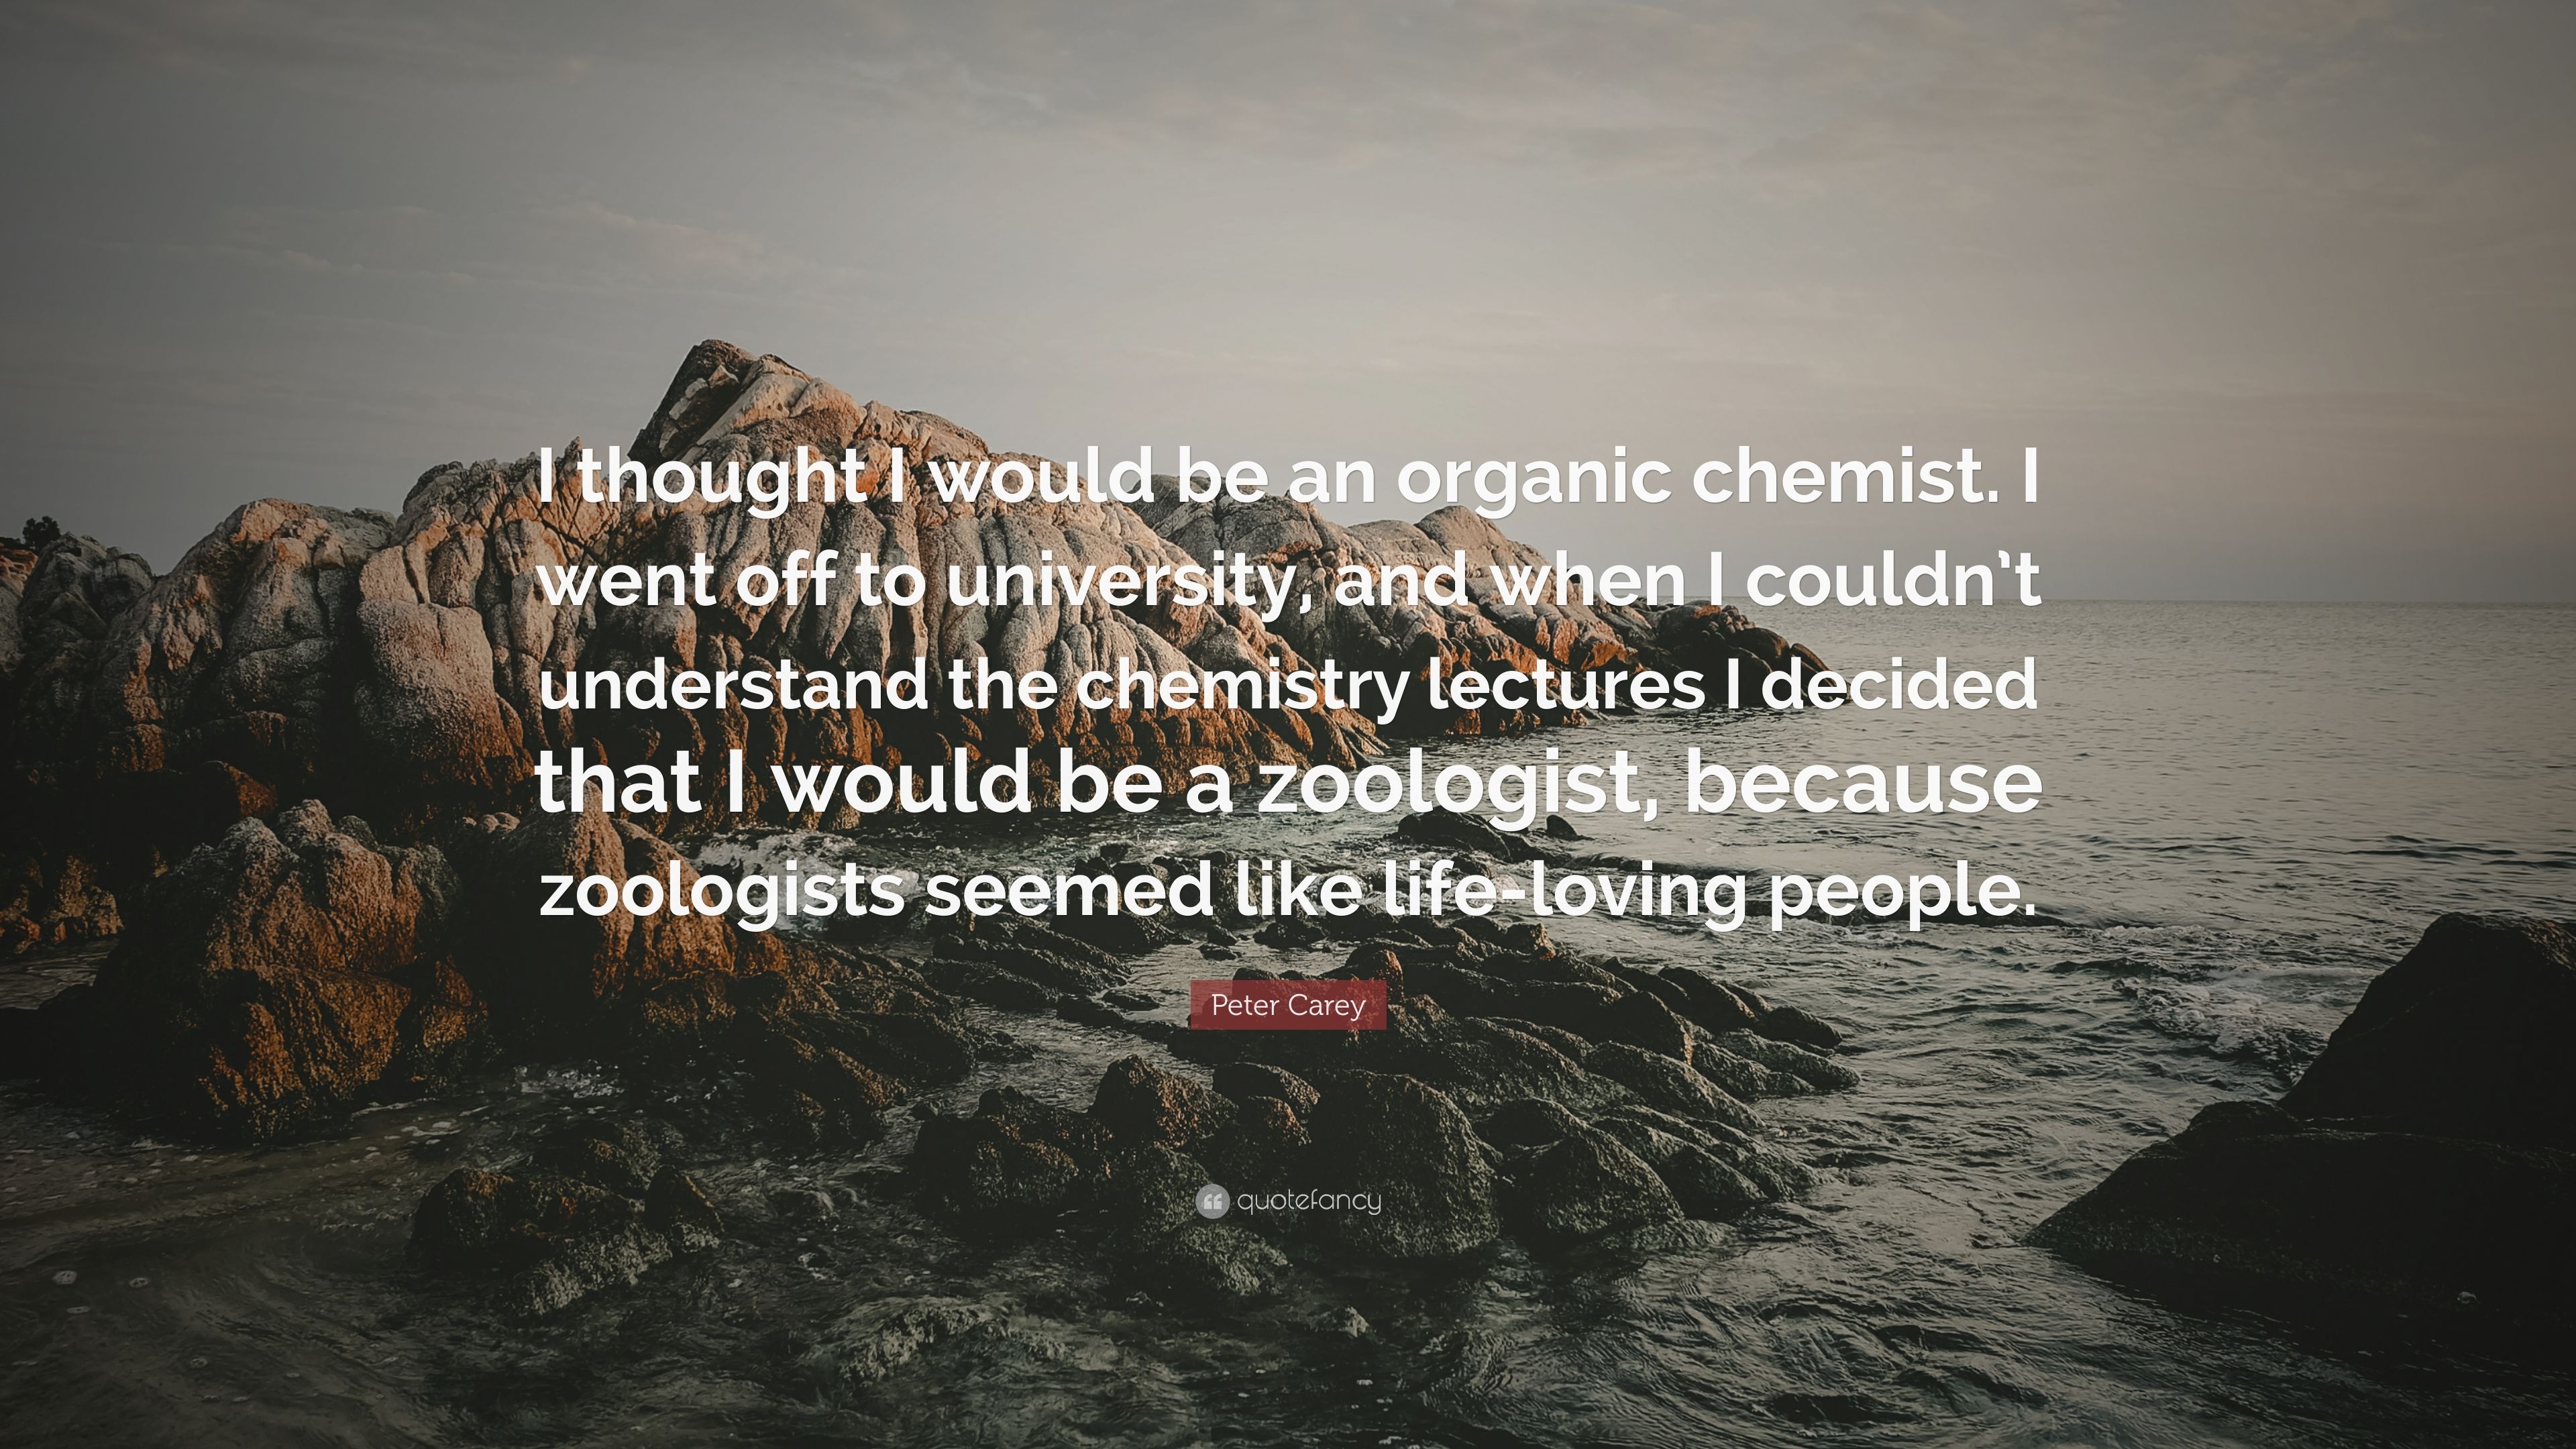 Peter Carey Quote: “I thought I would be an organic chemist. I